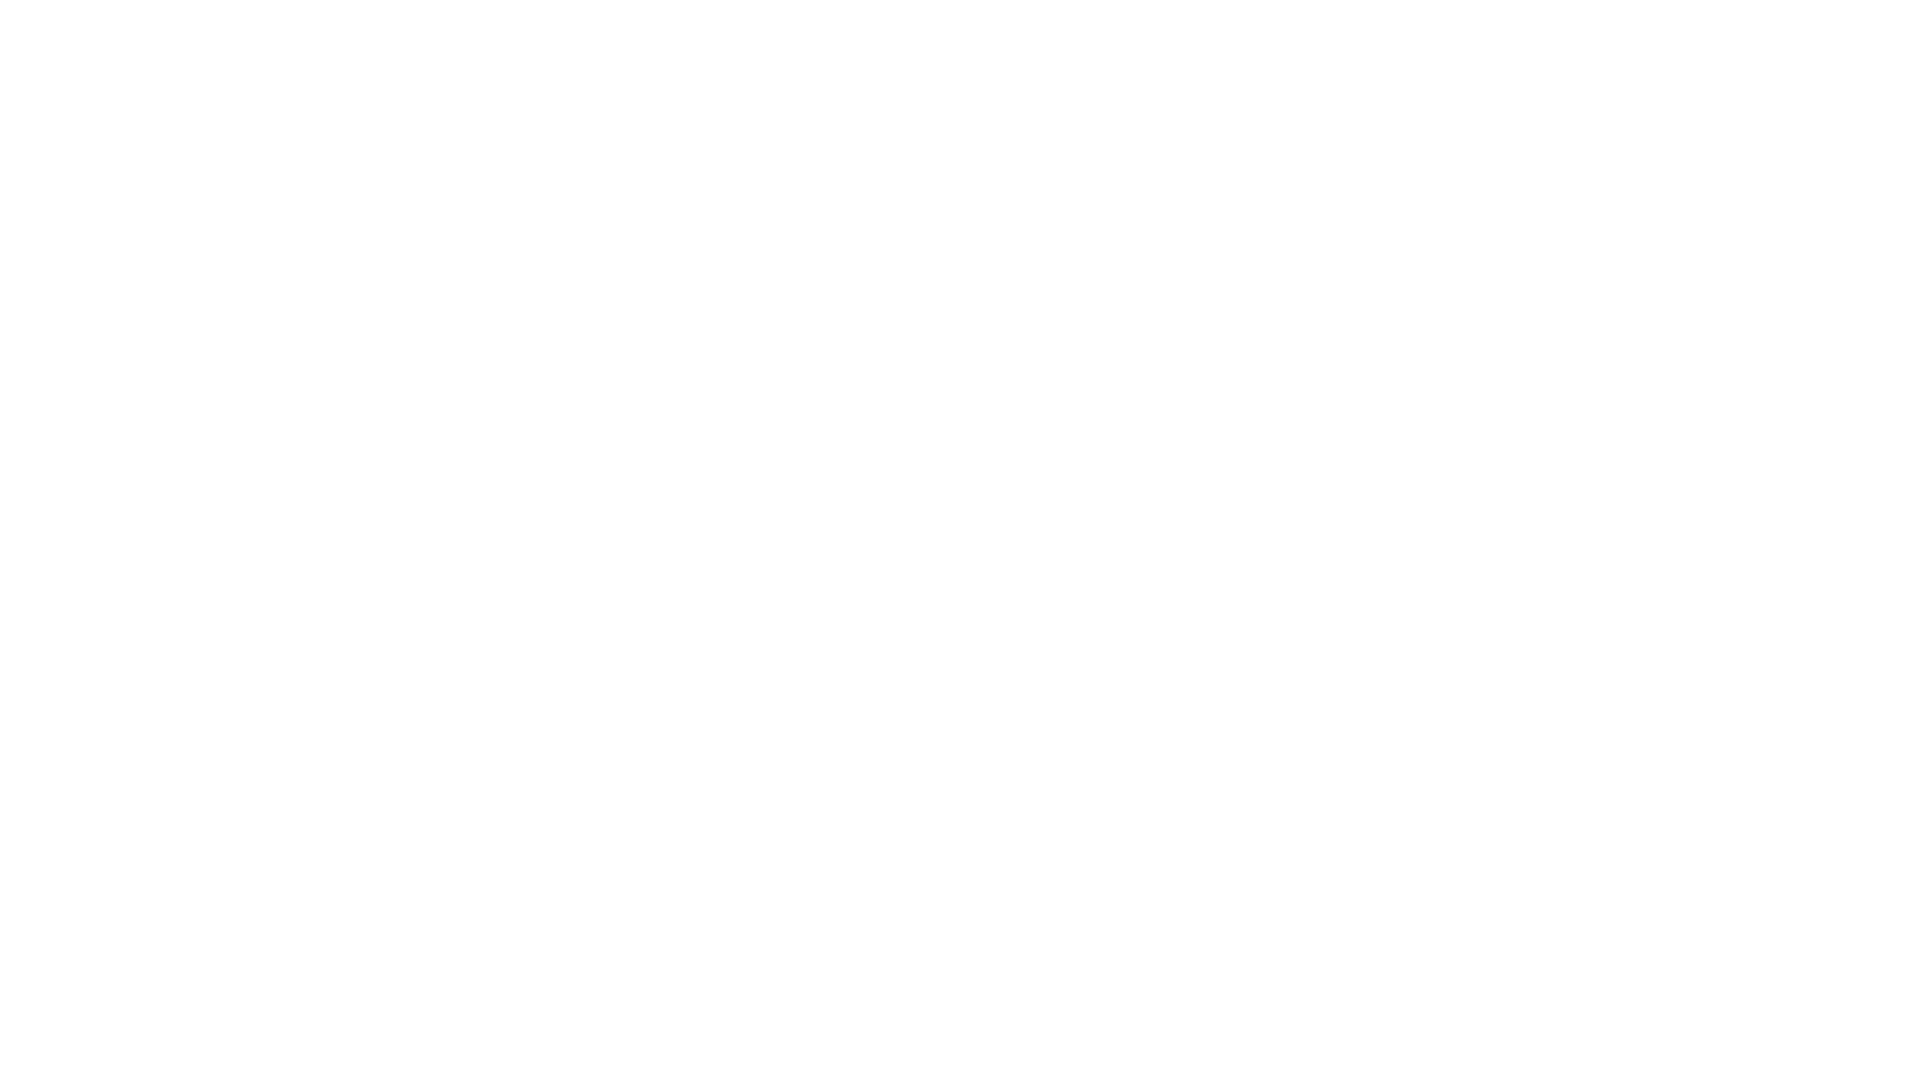 A lock up of the Movember and L’Oréal Men Expert logos.